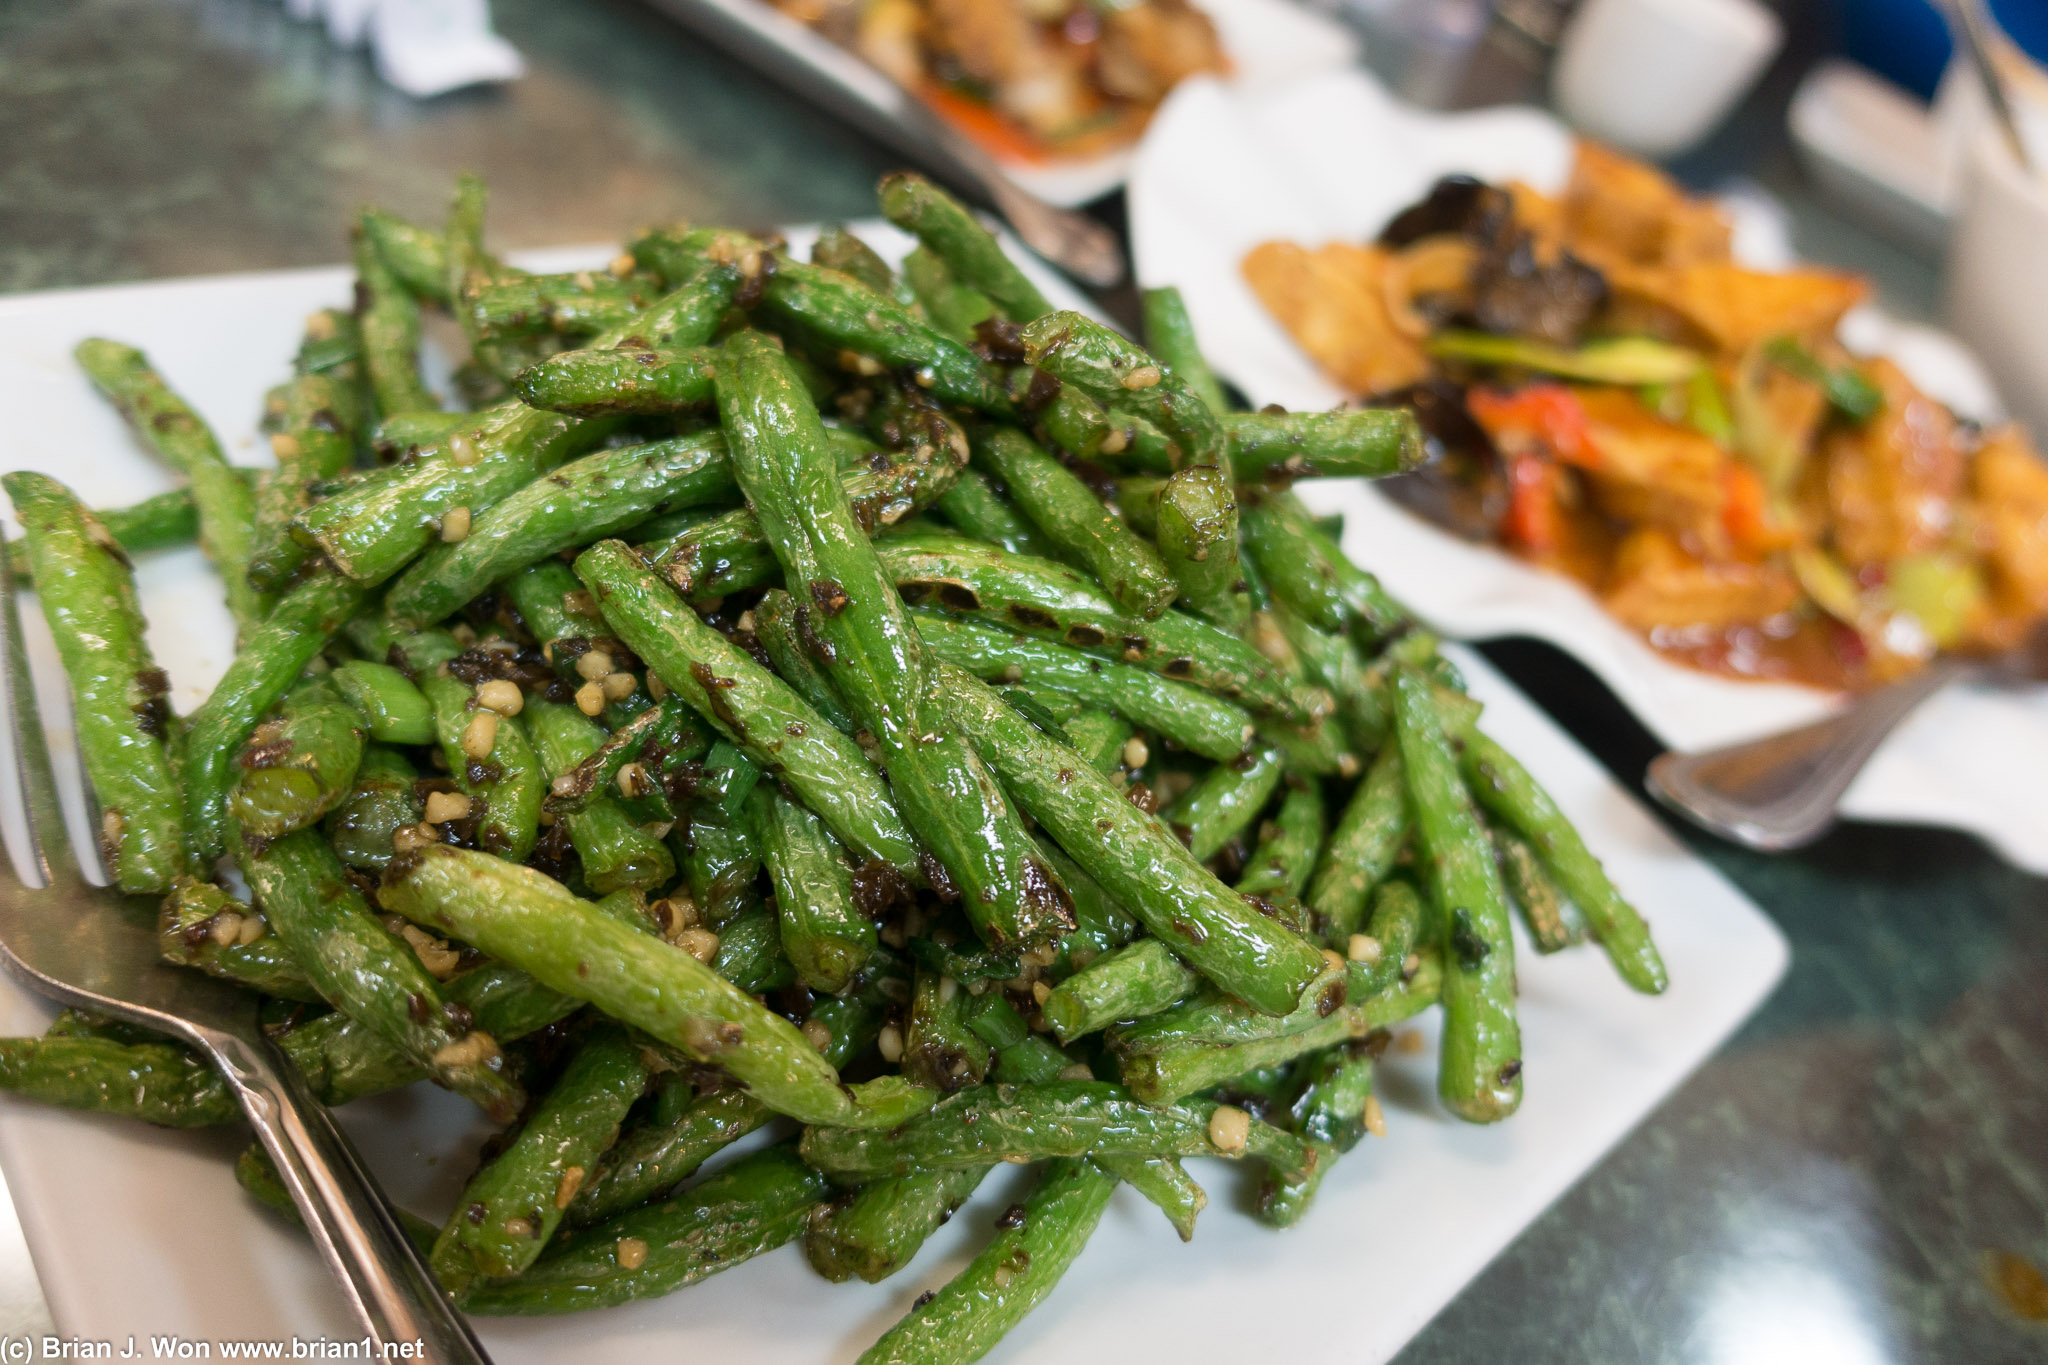 Green beans. They were better the previous visit.